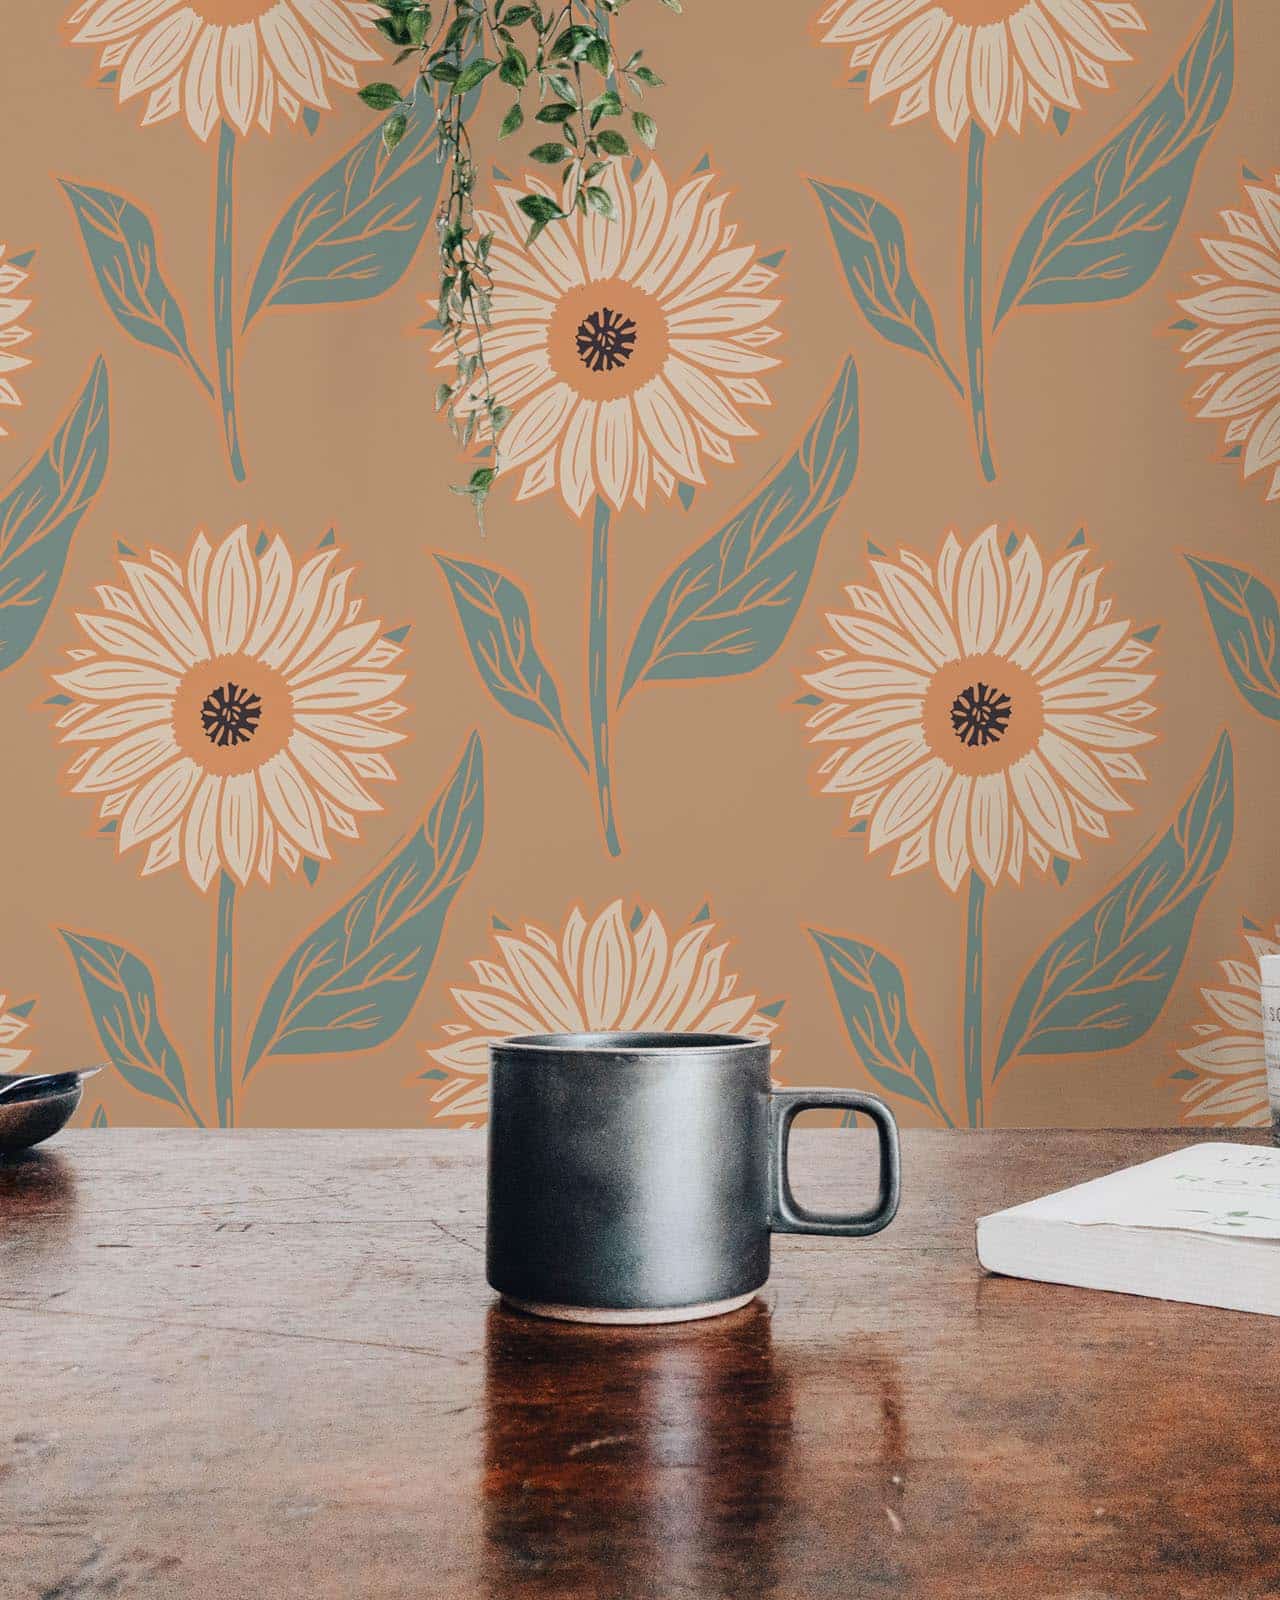 Playful Planets Wallpaper in Warm Tones on Navy | I Love Wallpaper